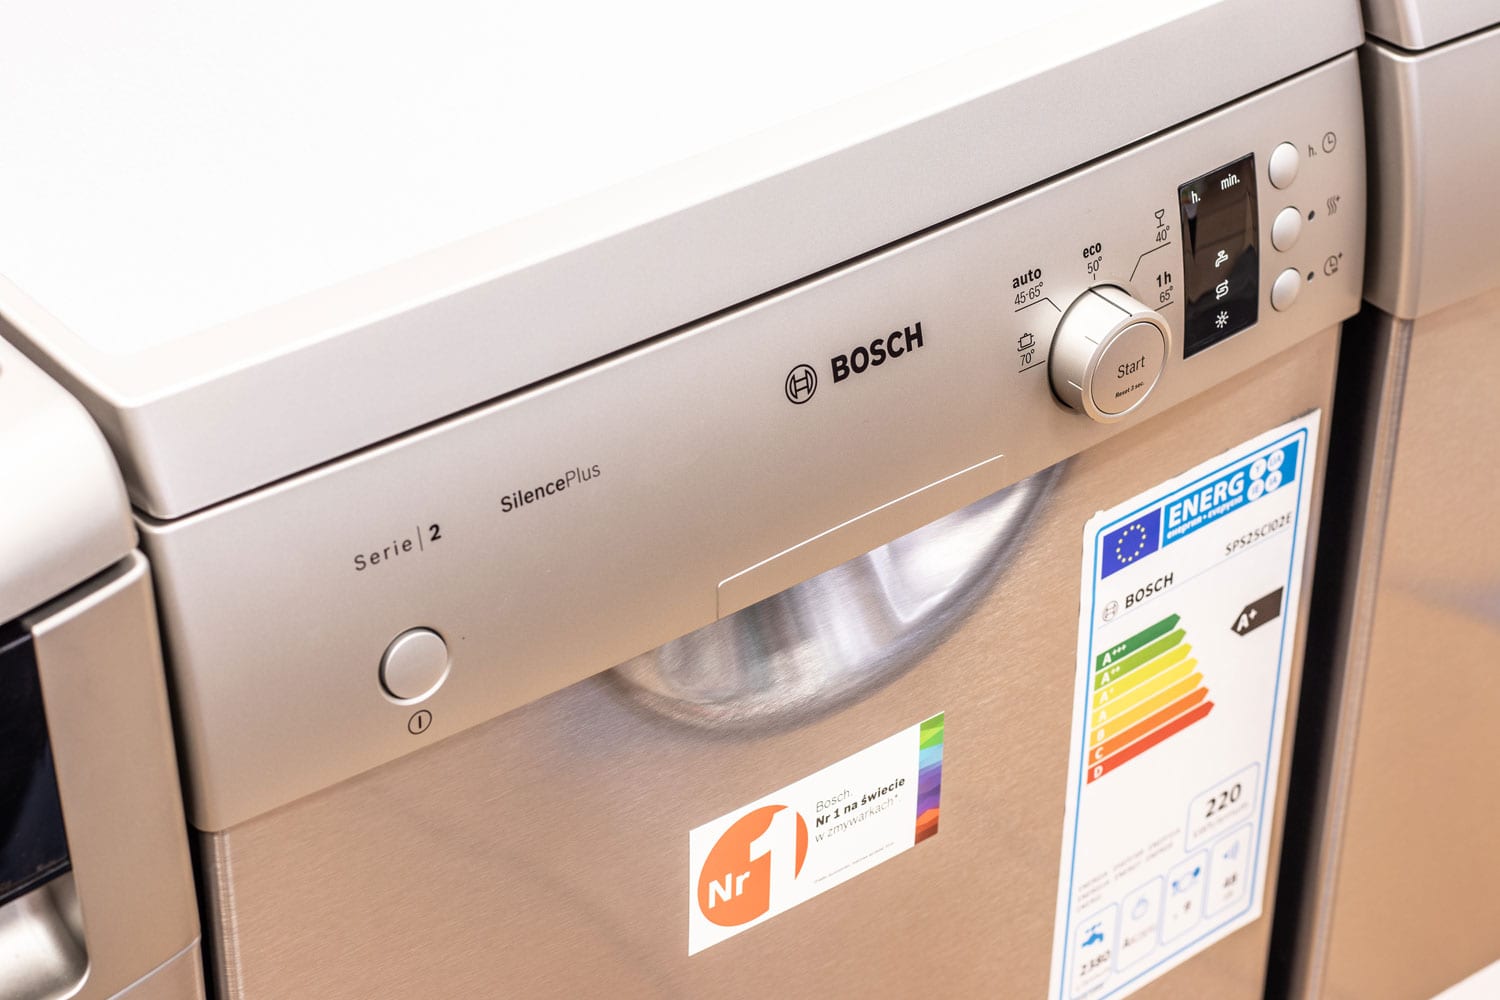 Bosch dishwasher displayed at an appliance store